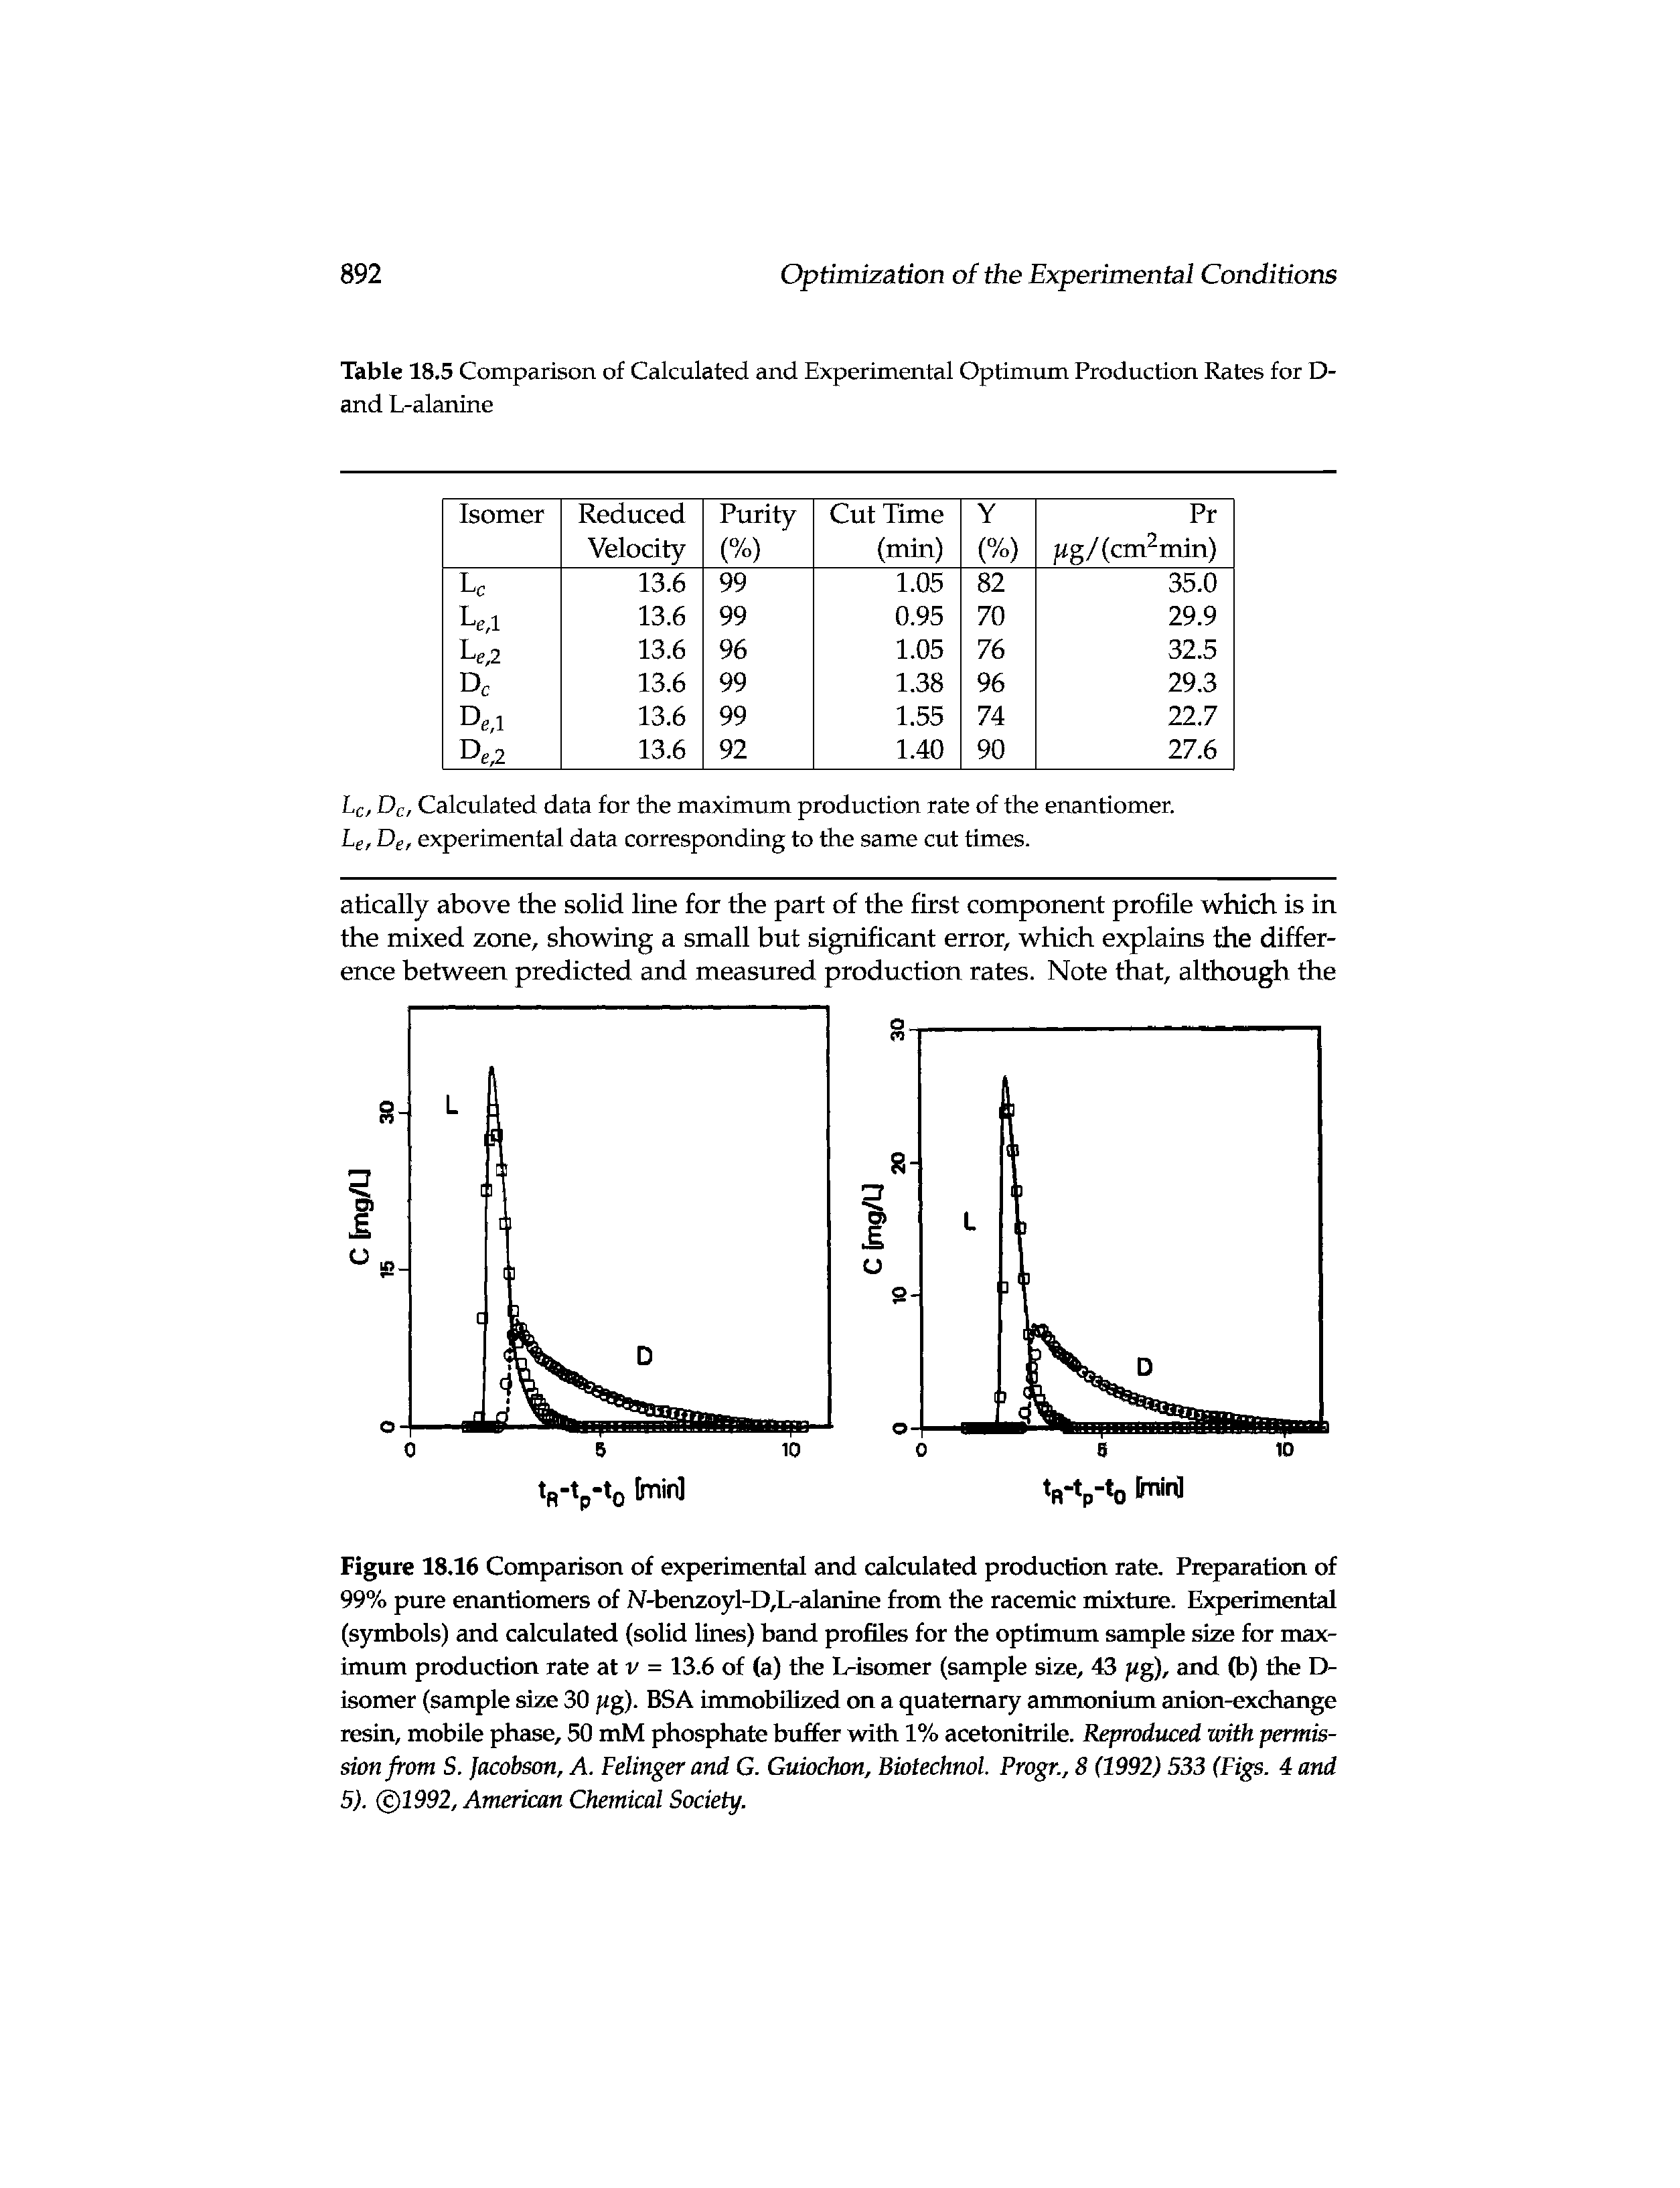 Figure 18.16 Comparison of experimental and calculated production rate. Preparation of 99% pure enantiomers of N-benzoyl-D,L-alanine from the racemic mixture. Experimental (symbols) and calculated (solid lines) band profiles for the optimum sample size for maximum production rate at v = 13.6 of (a) the L-isomer (sample size, 43 g), and (b) the D-isomer (sample size 30 fig). BSA immobilized on a quaternary ammonium anion-exchange resin, mobile phase, 50 mM phosphate buffer with 1% acetonitrile. Reproduced with permission from S. Jacobson, A. Felinger and G. Guiochon, Biotechnol. Progr., 8 (1992) 533 (Figs. 4 and 5). (c)1992, American Chemical Society.